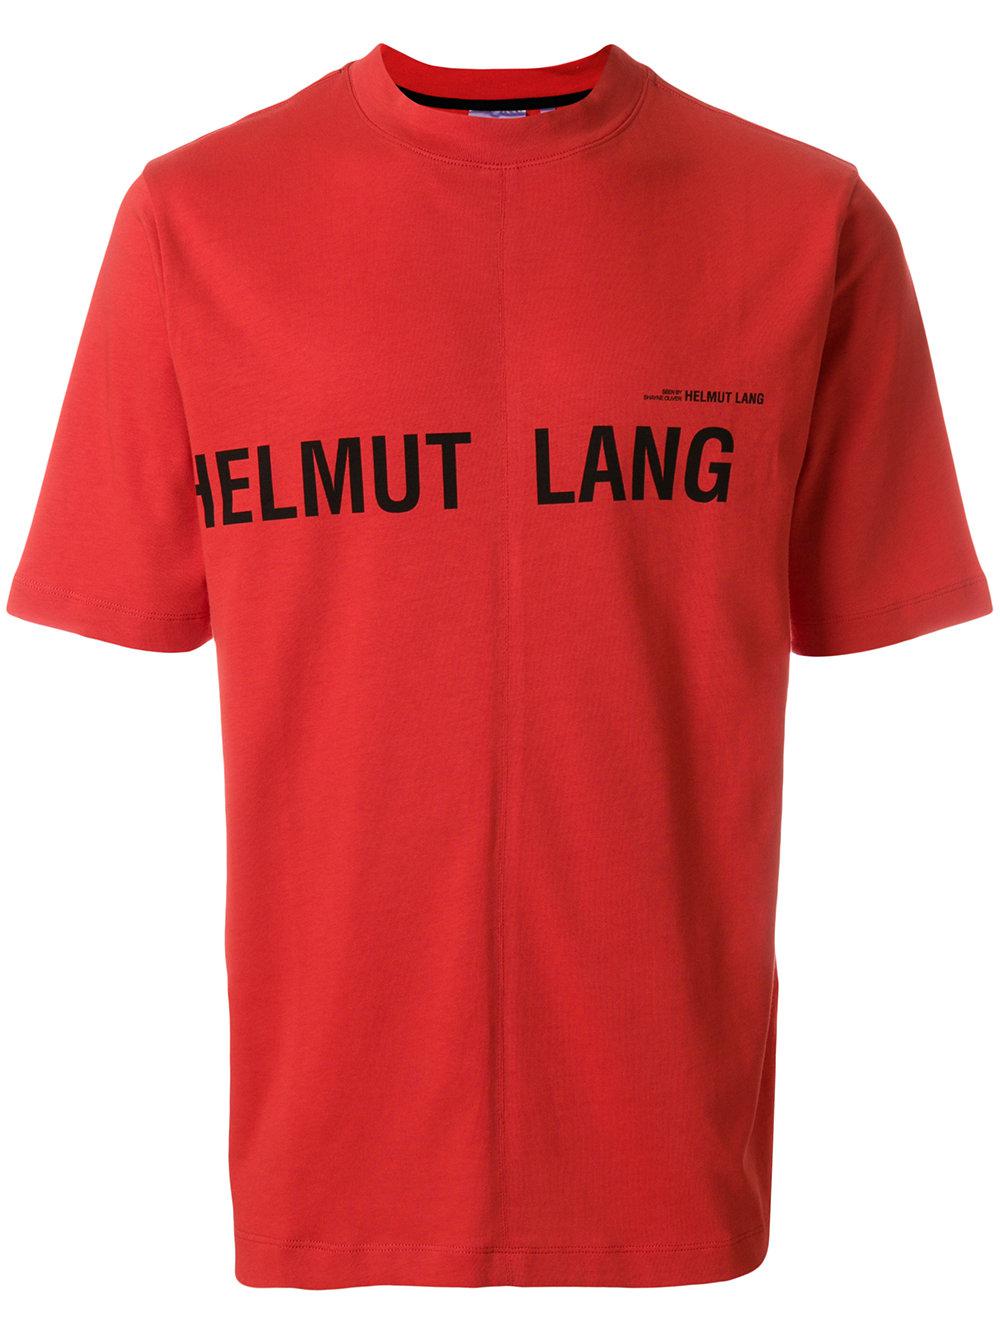 Helmut Lang Cotton Logo Printed T-shirt in Red for Men - Lyst